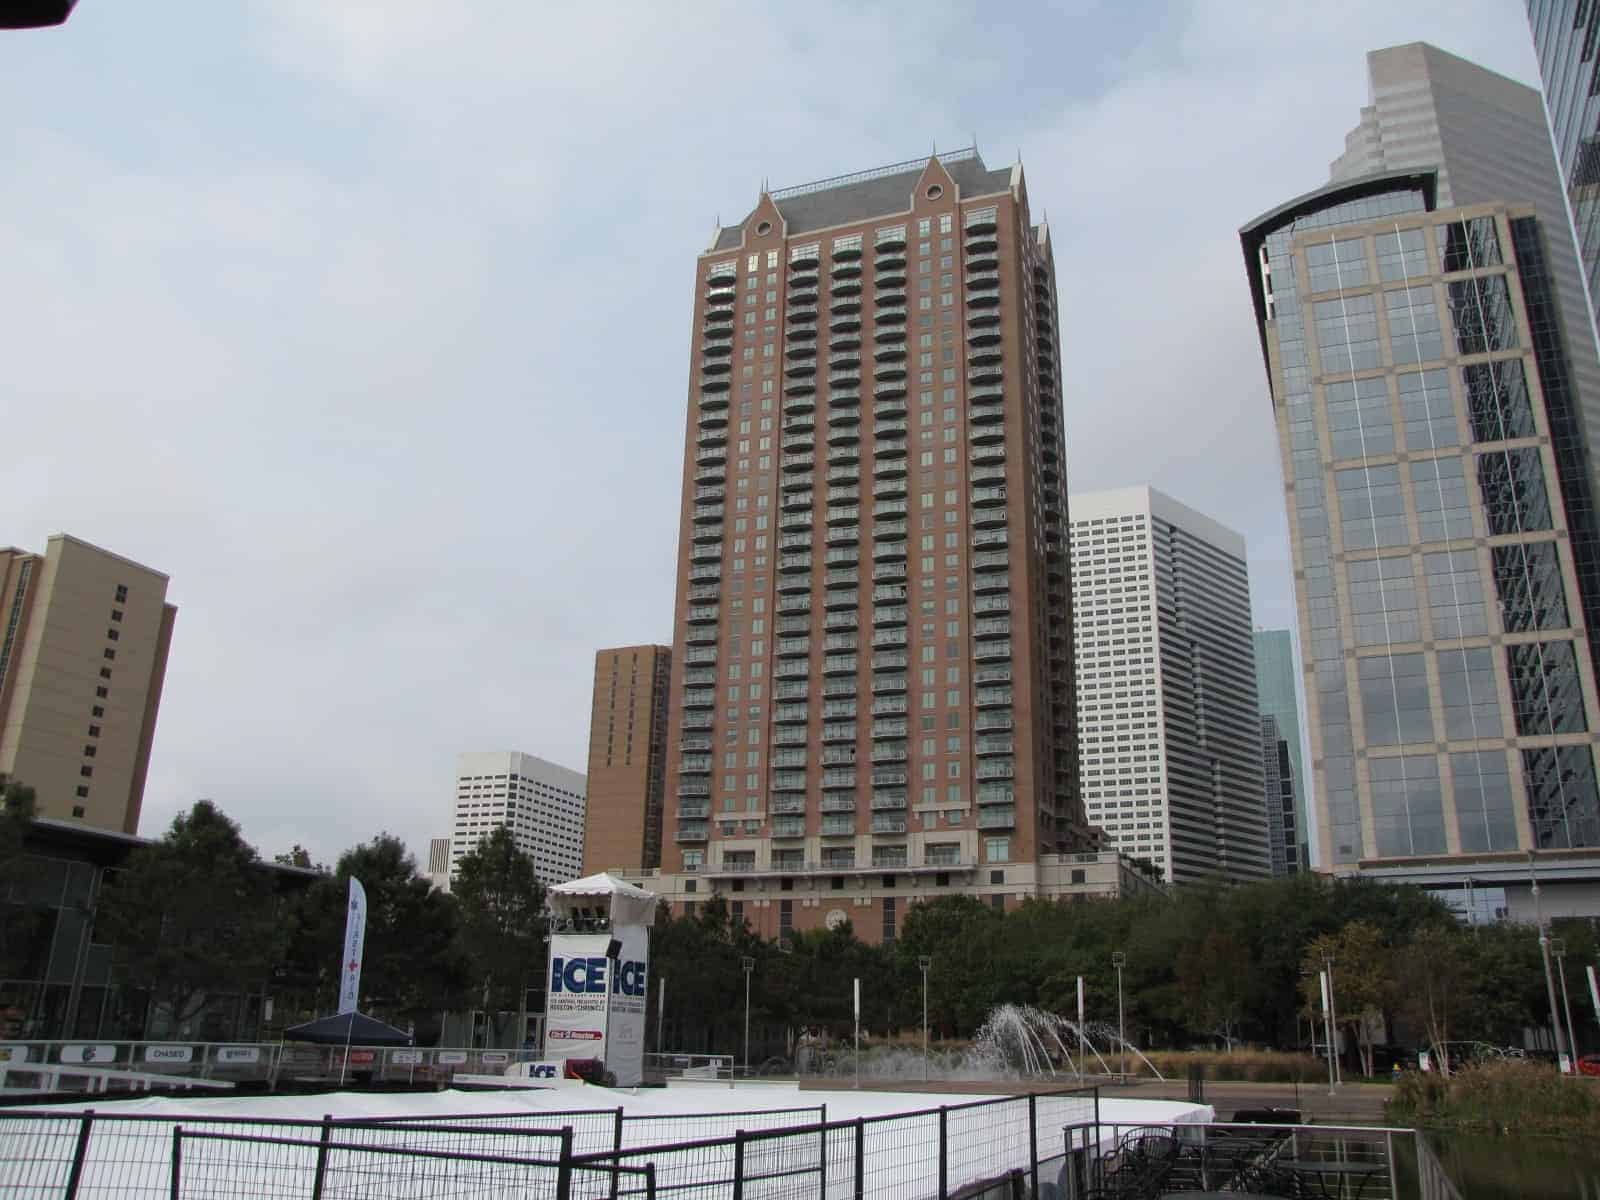 Discovery Green Houston TX View of Ice Rink